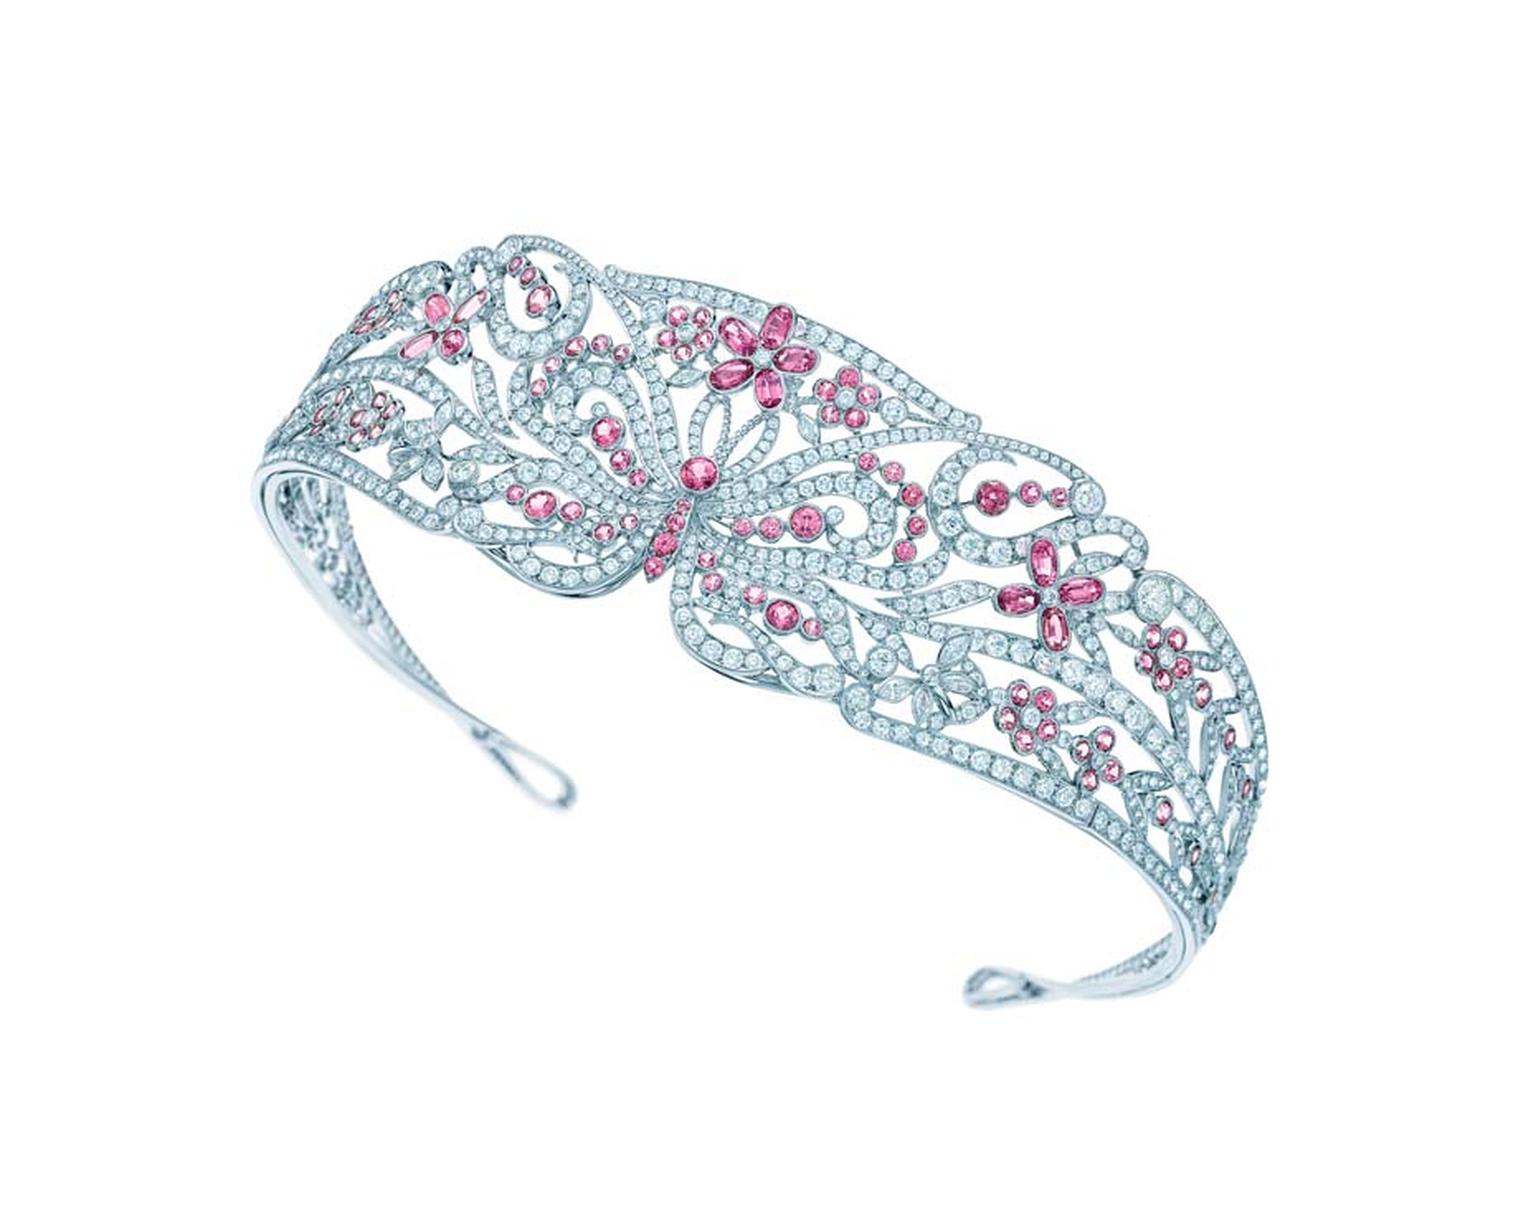 Tiffany & Co. tiara from the high jewellery Blue Book collection with a butterfly motif crafted from platinum, pink spinels and more than 20.00cts of white diamonds.